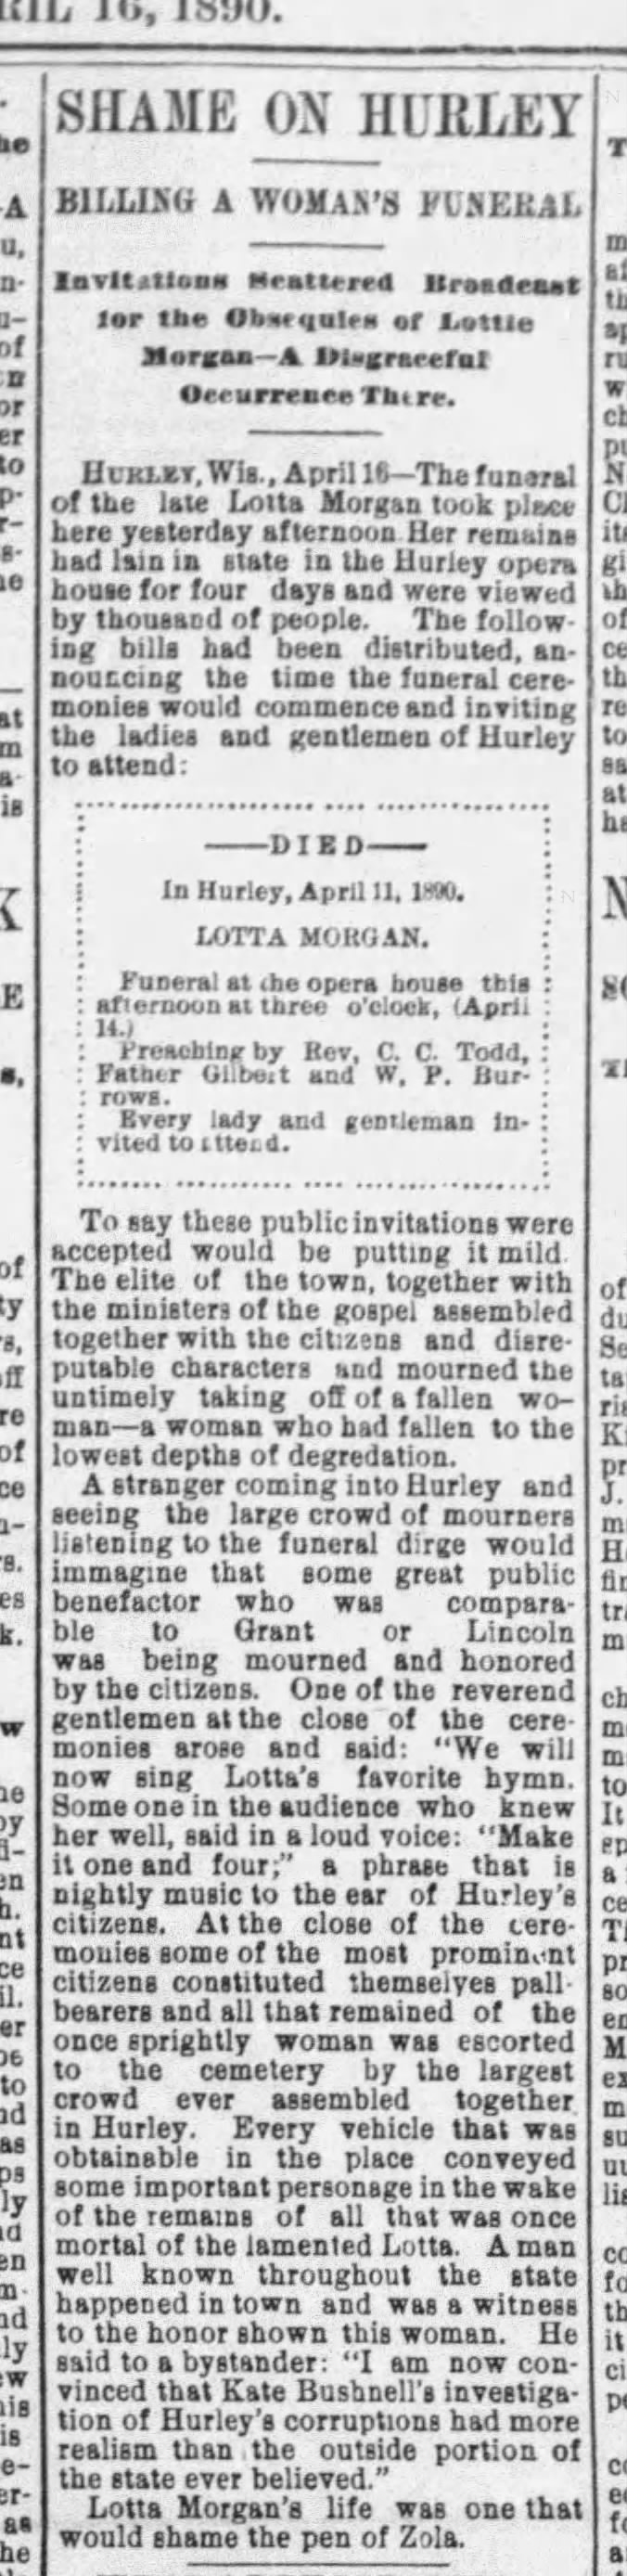 Hurley and the murder of Lotta Morgan. 1890